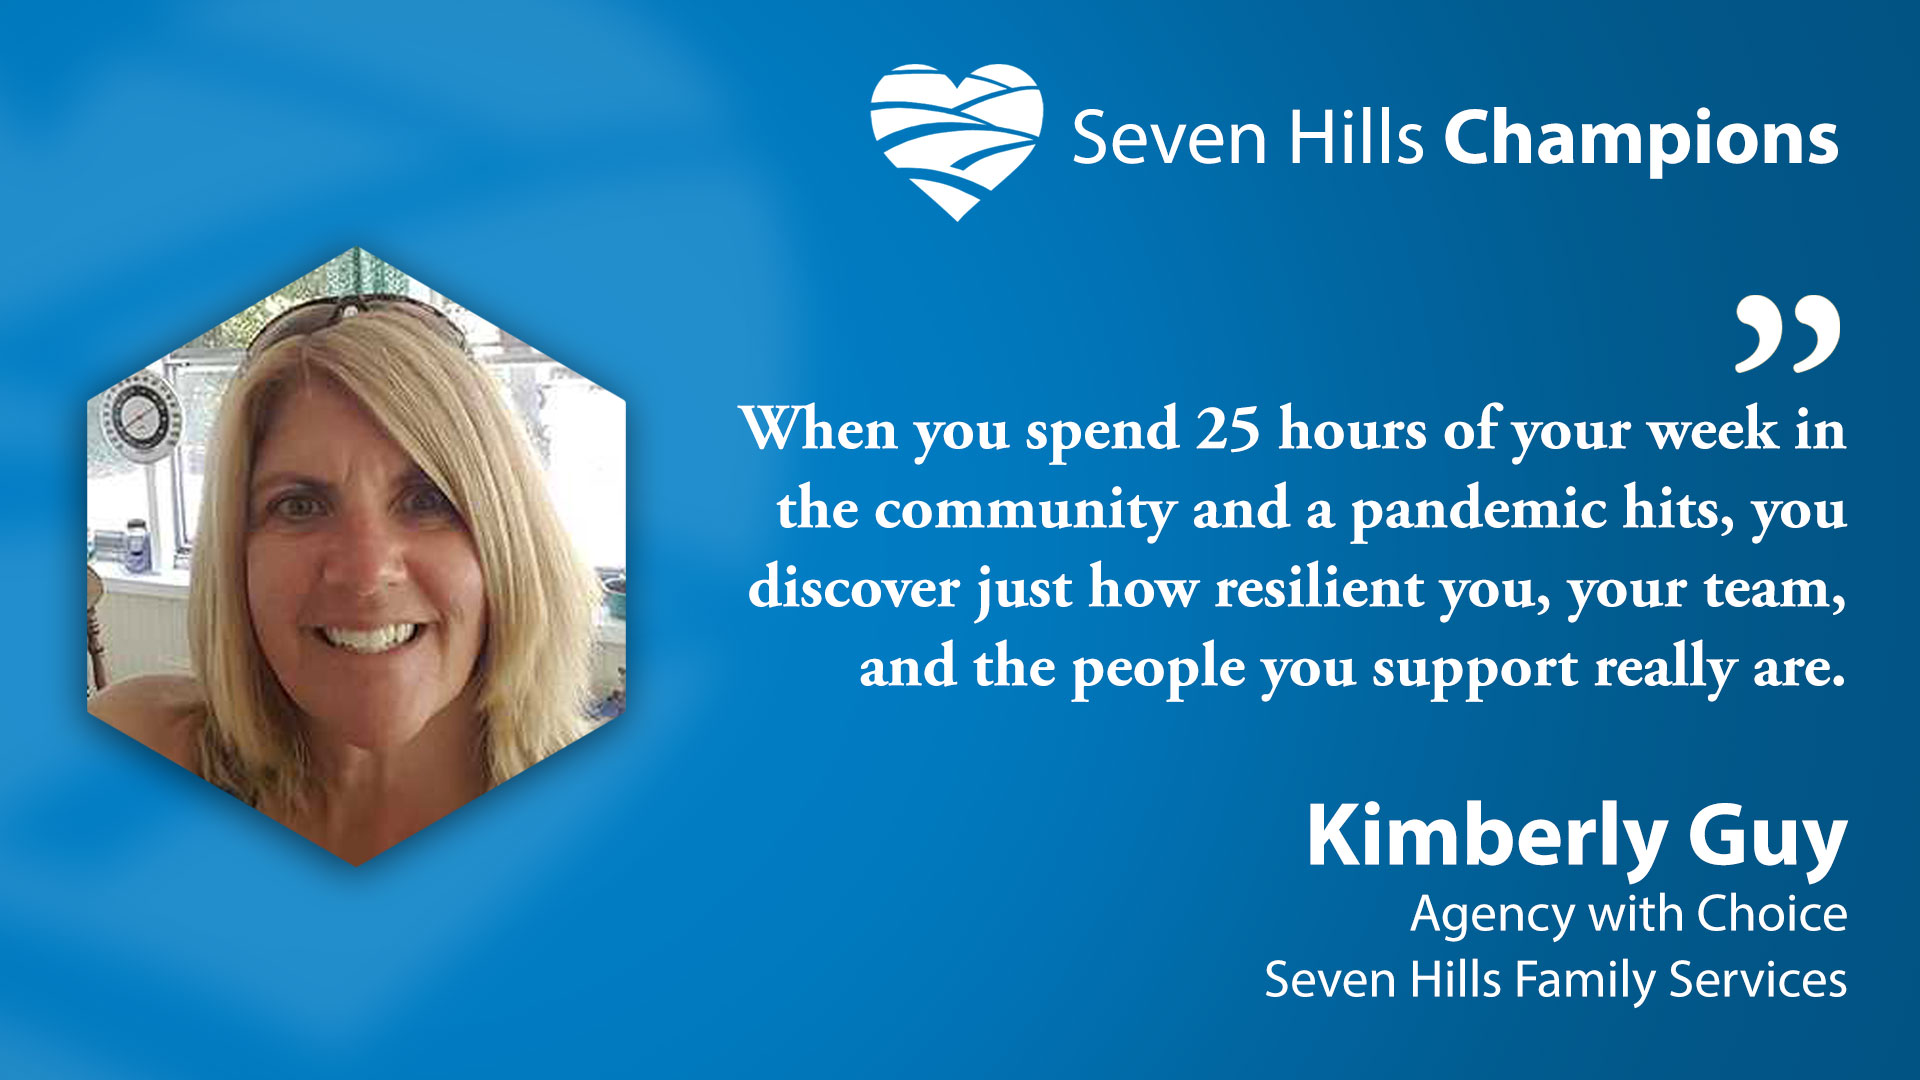 Introducing This Weeks Seven Hills Champion: Kimberly Guy, Agency with Choice: Seven Hills Family Services